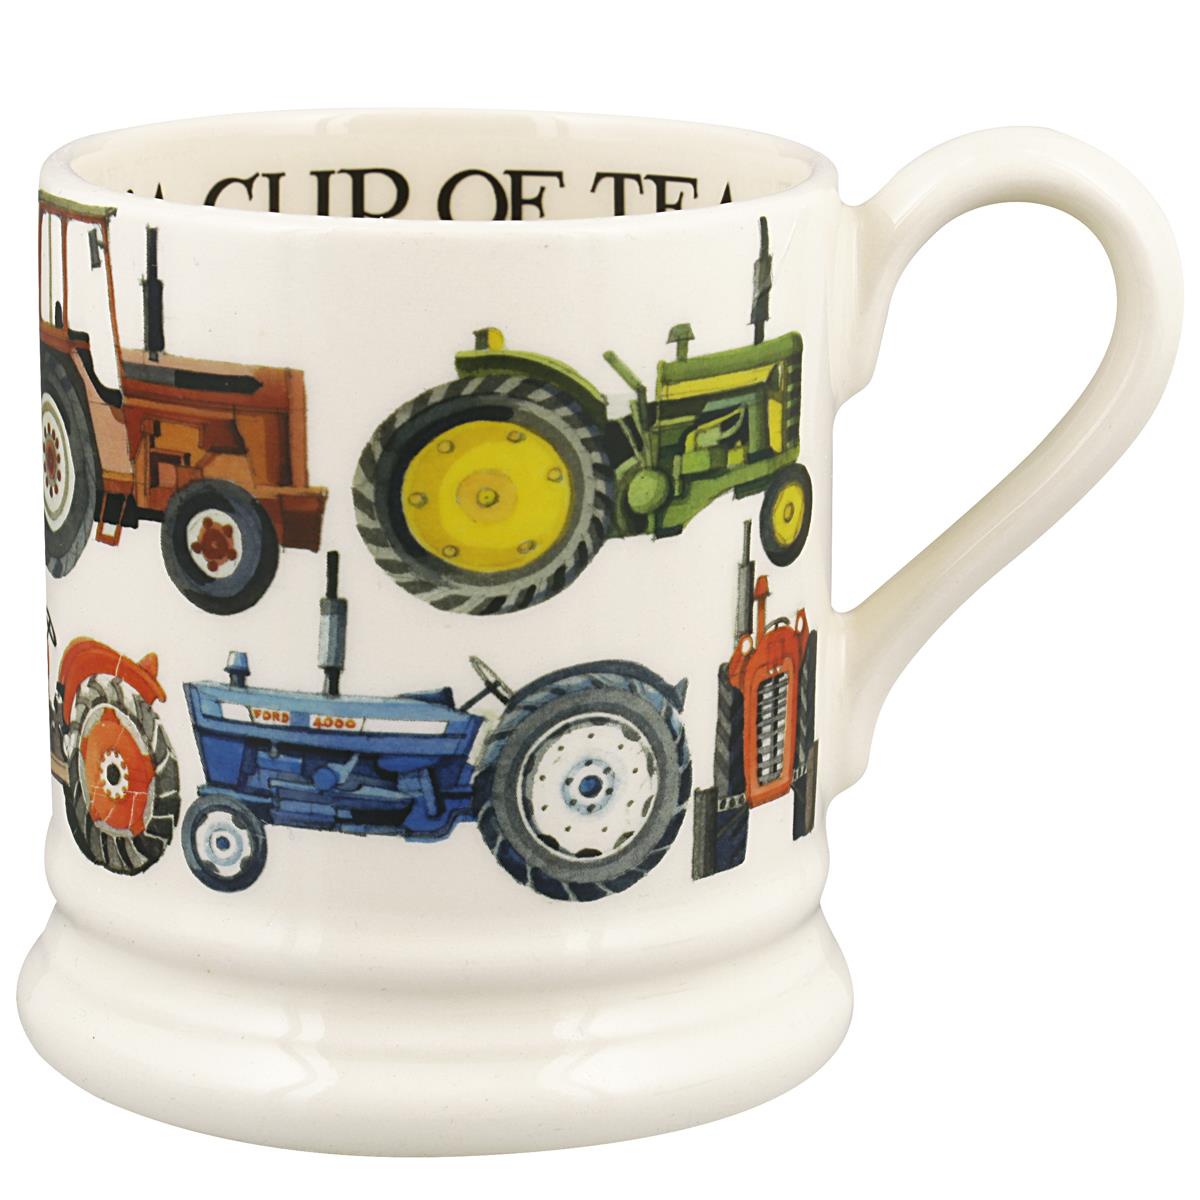 What is written inside the top of the emma bridgewater tractor mug?